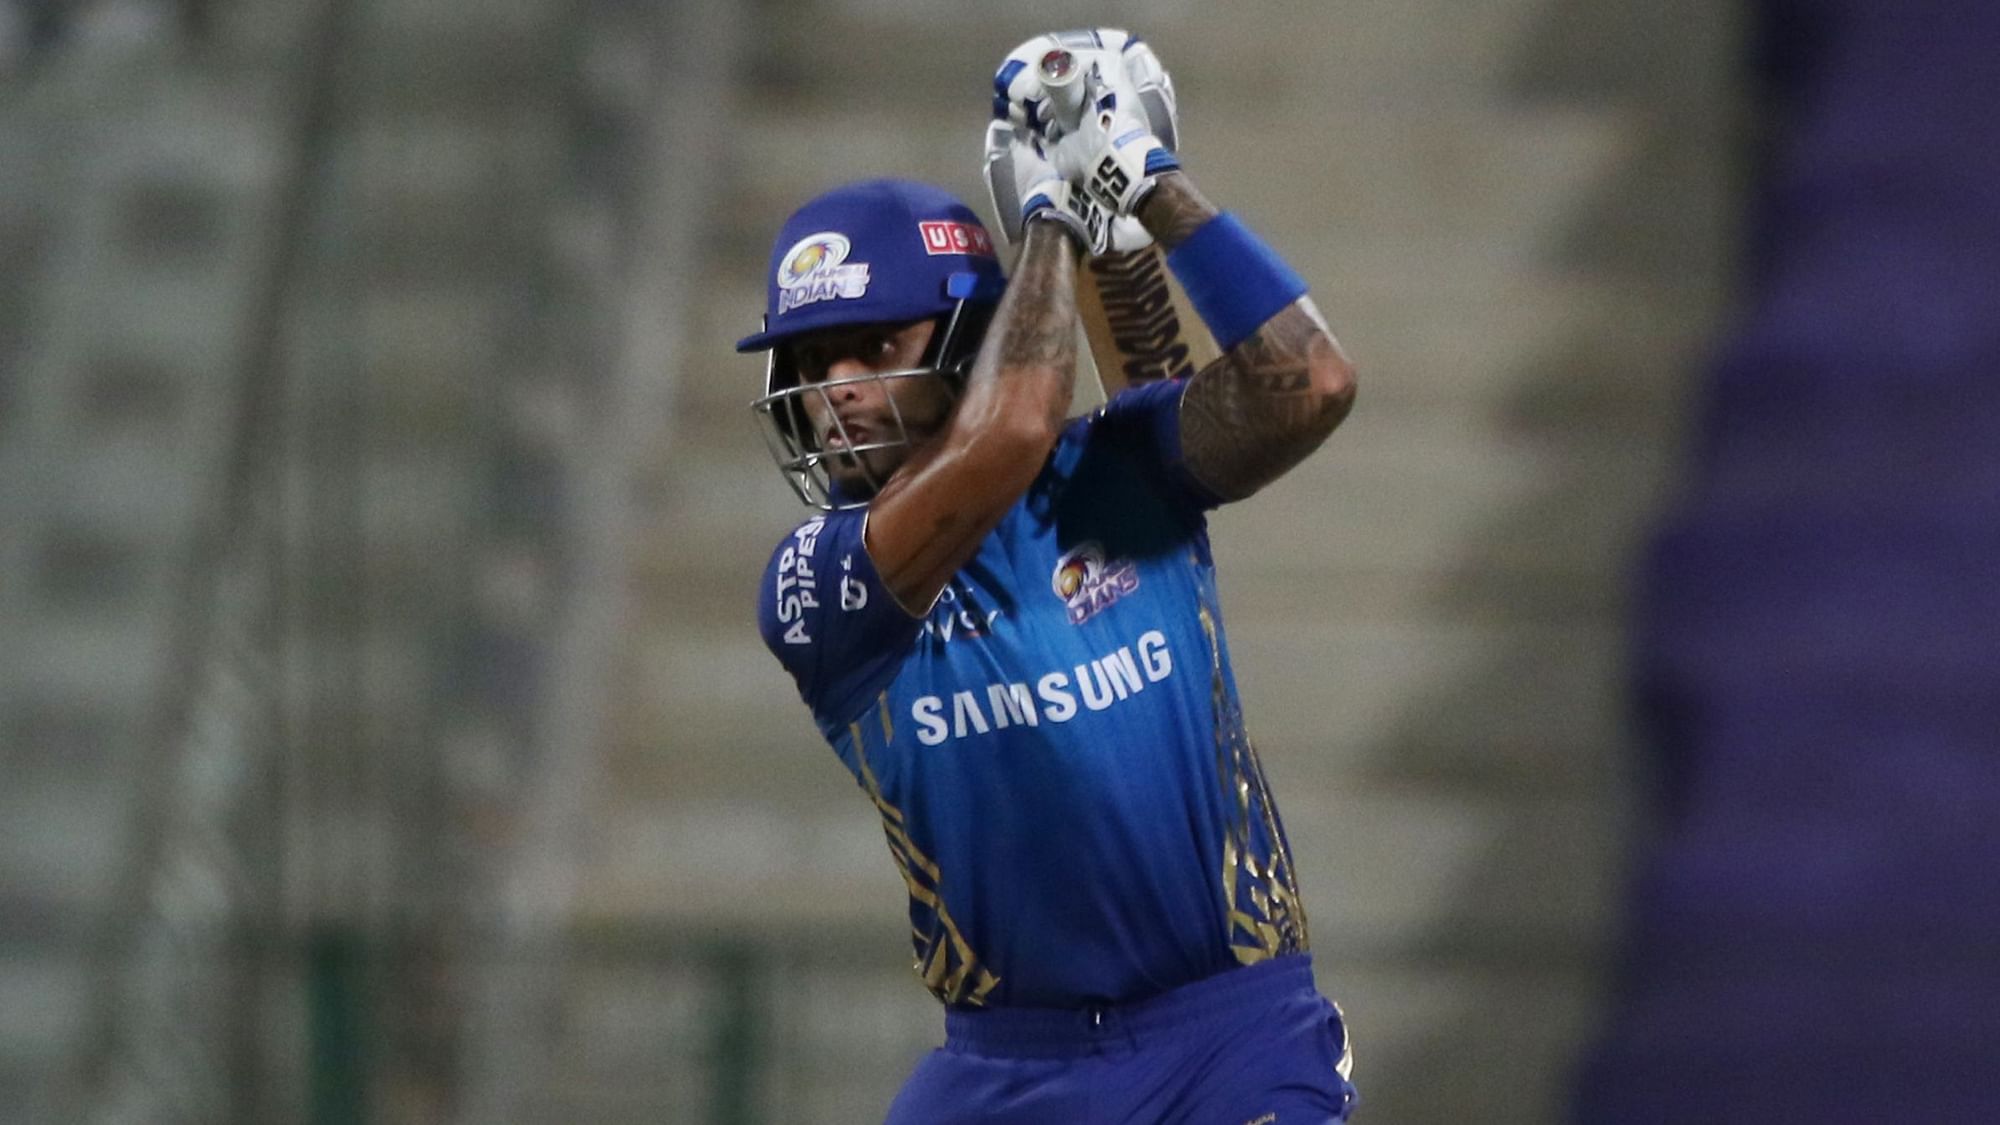 Suryakumar Yadav has been in scintillating form for Mumbai Indians in the IPL 2020, but is still bereft of donning India blue.